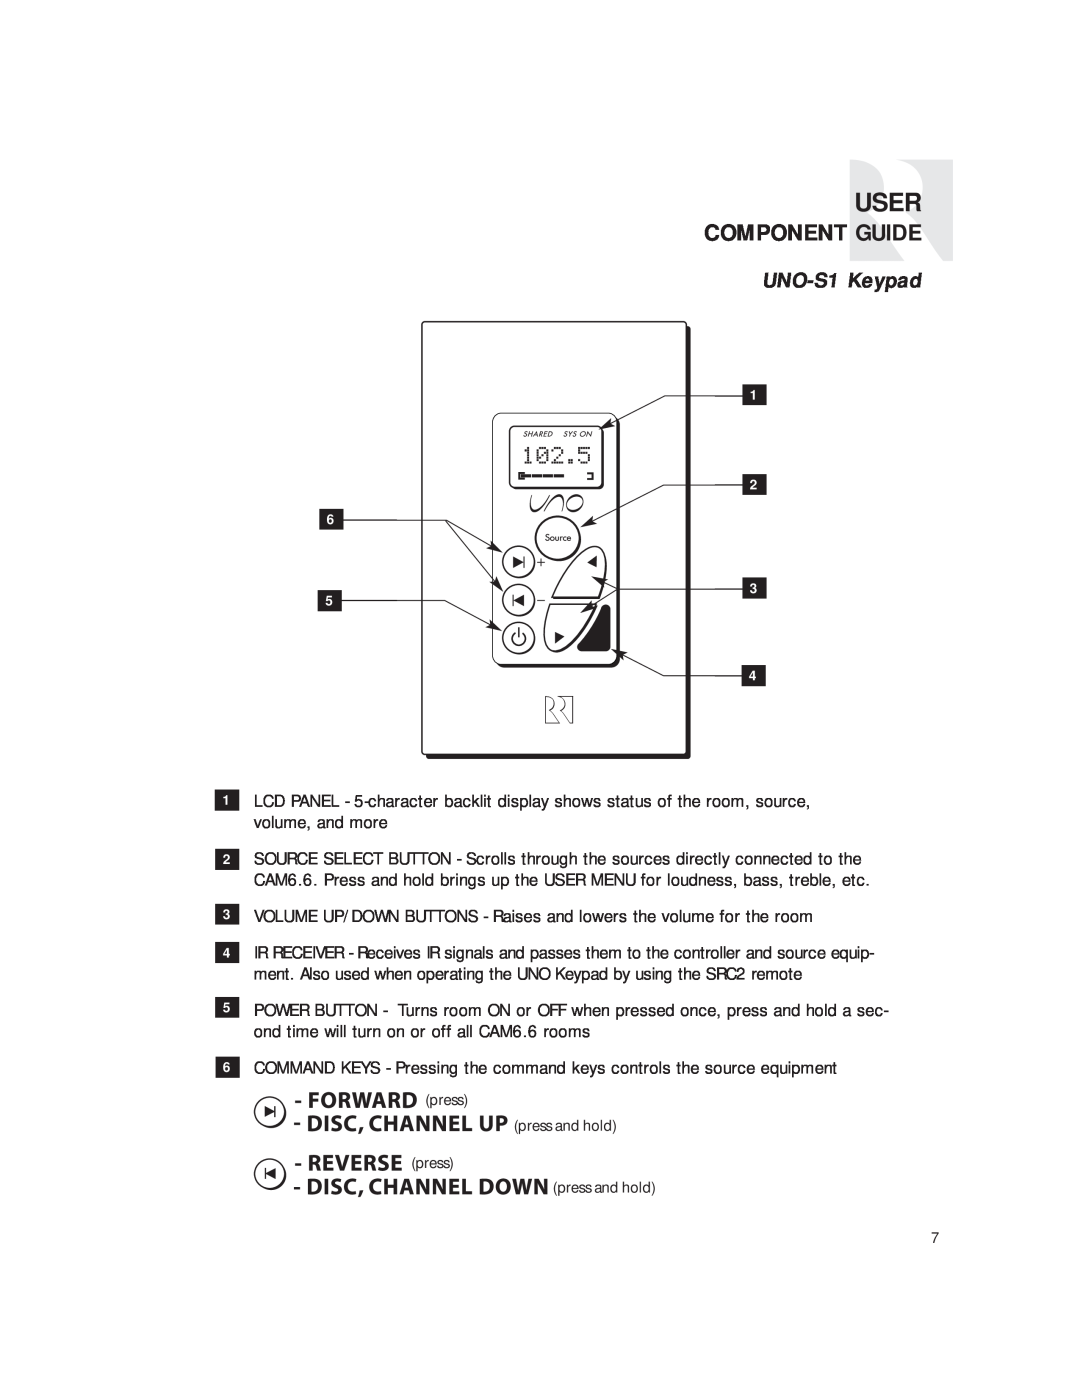 Russound CAM6.6T instruction manual 102.5, UNO-S1Keypad, User, Component Guide 